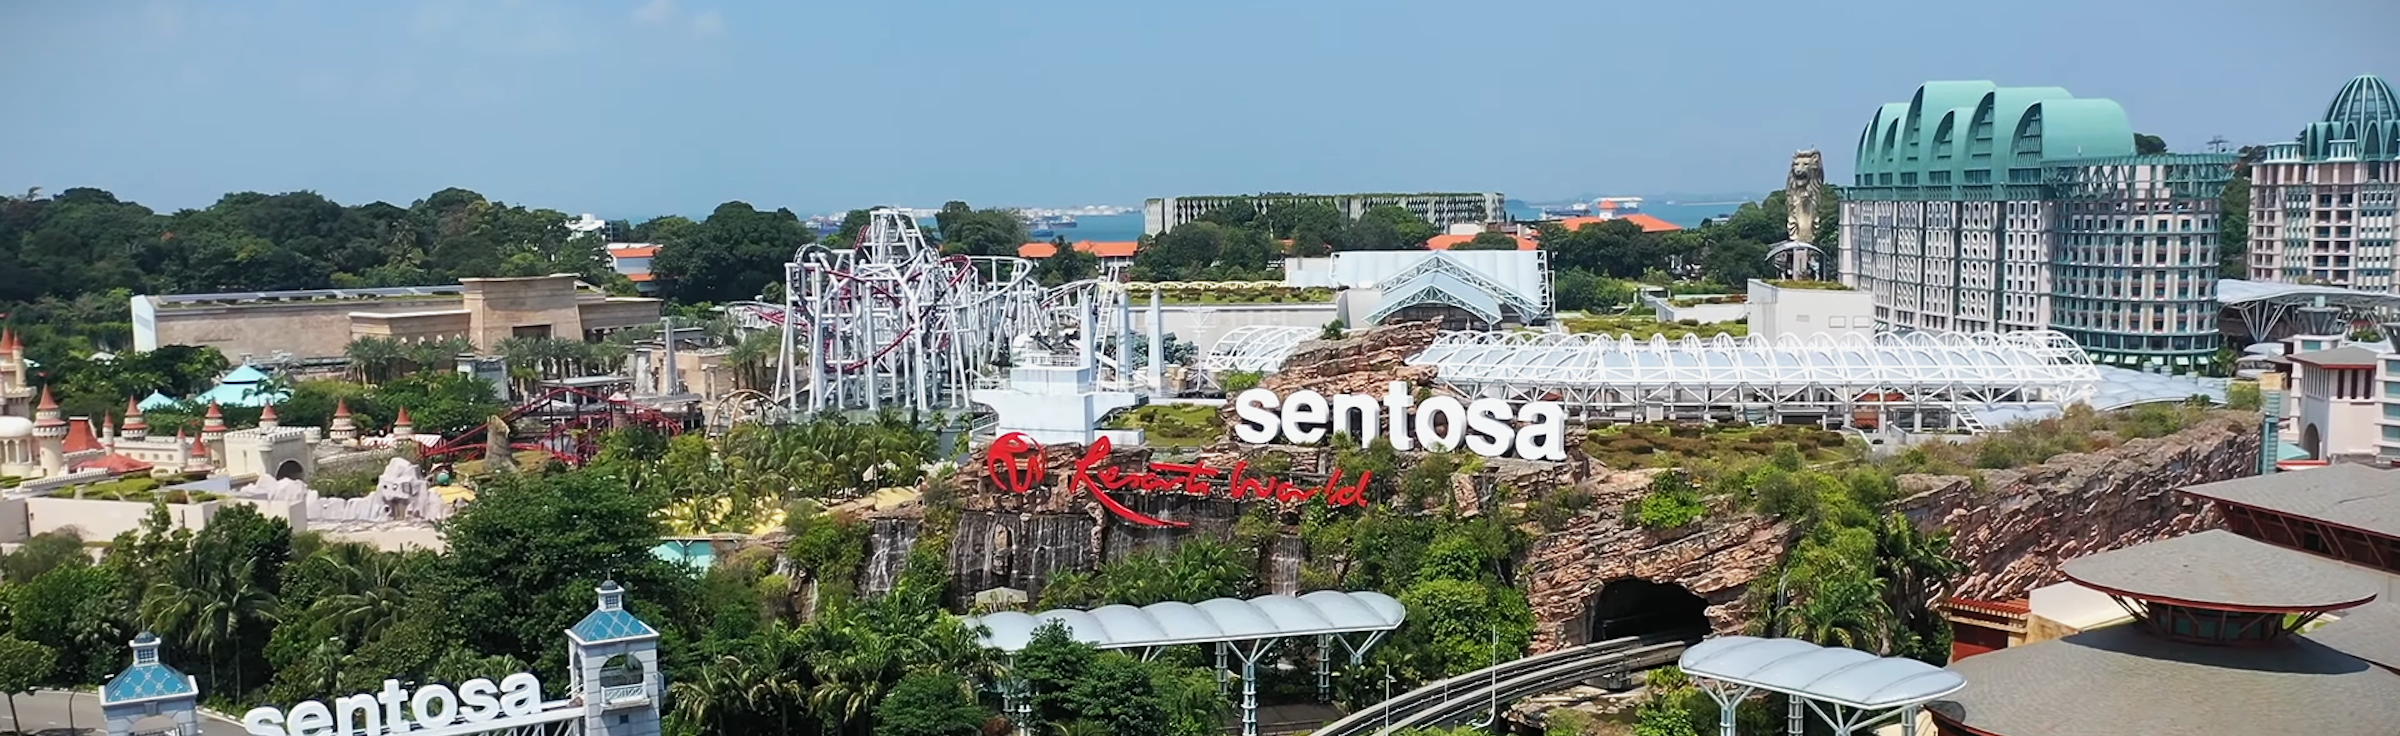 Sentosa Island Tour Packages